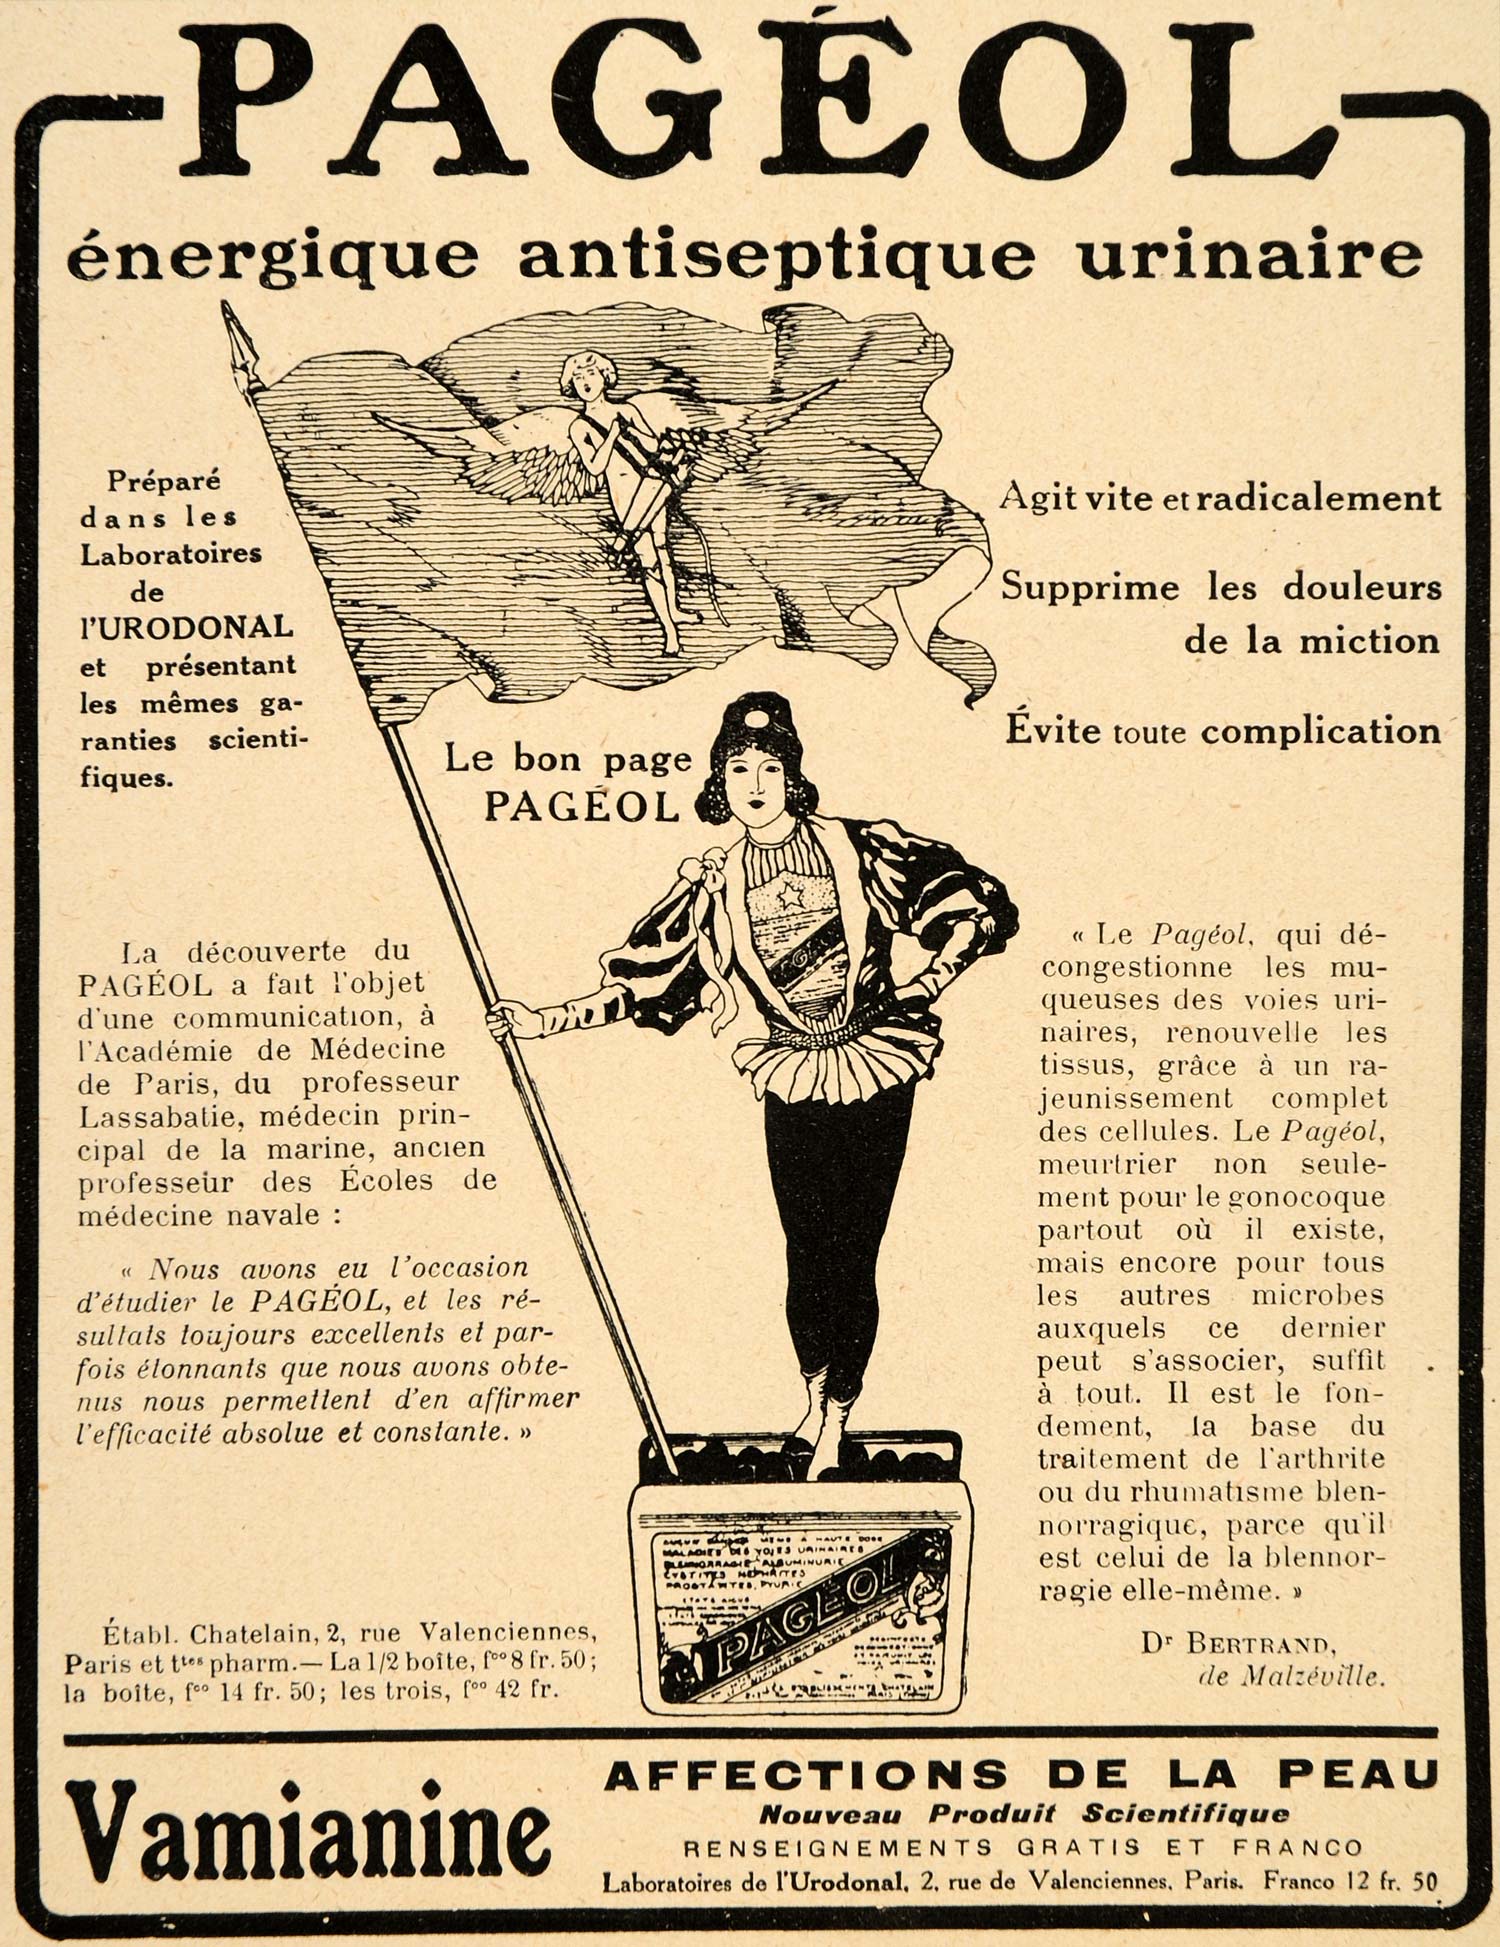 1920 Ad French Vamianine Pageol Urinary Antiseptic Med - ORIGINAL ILL3